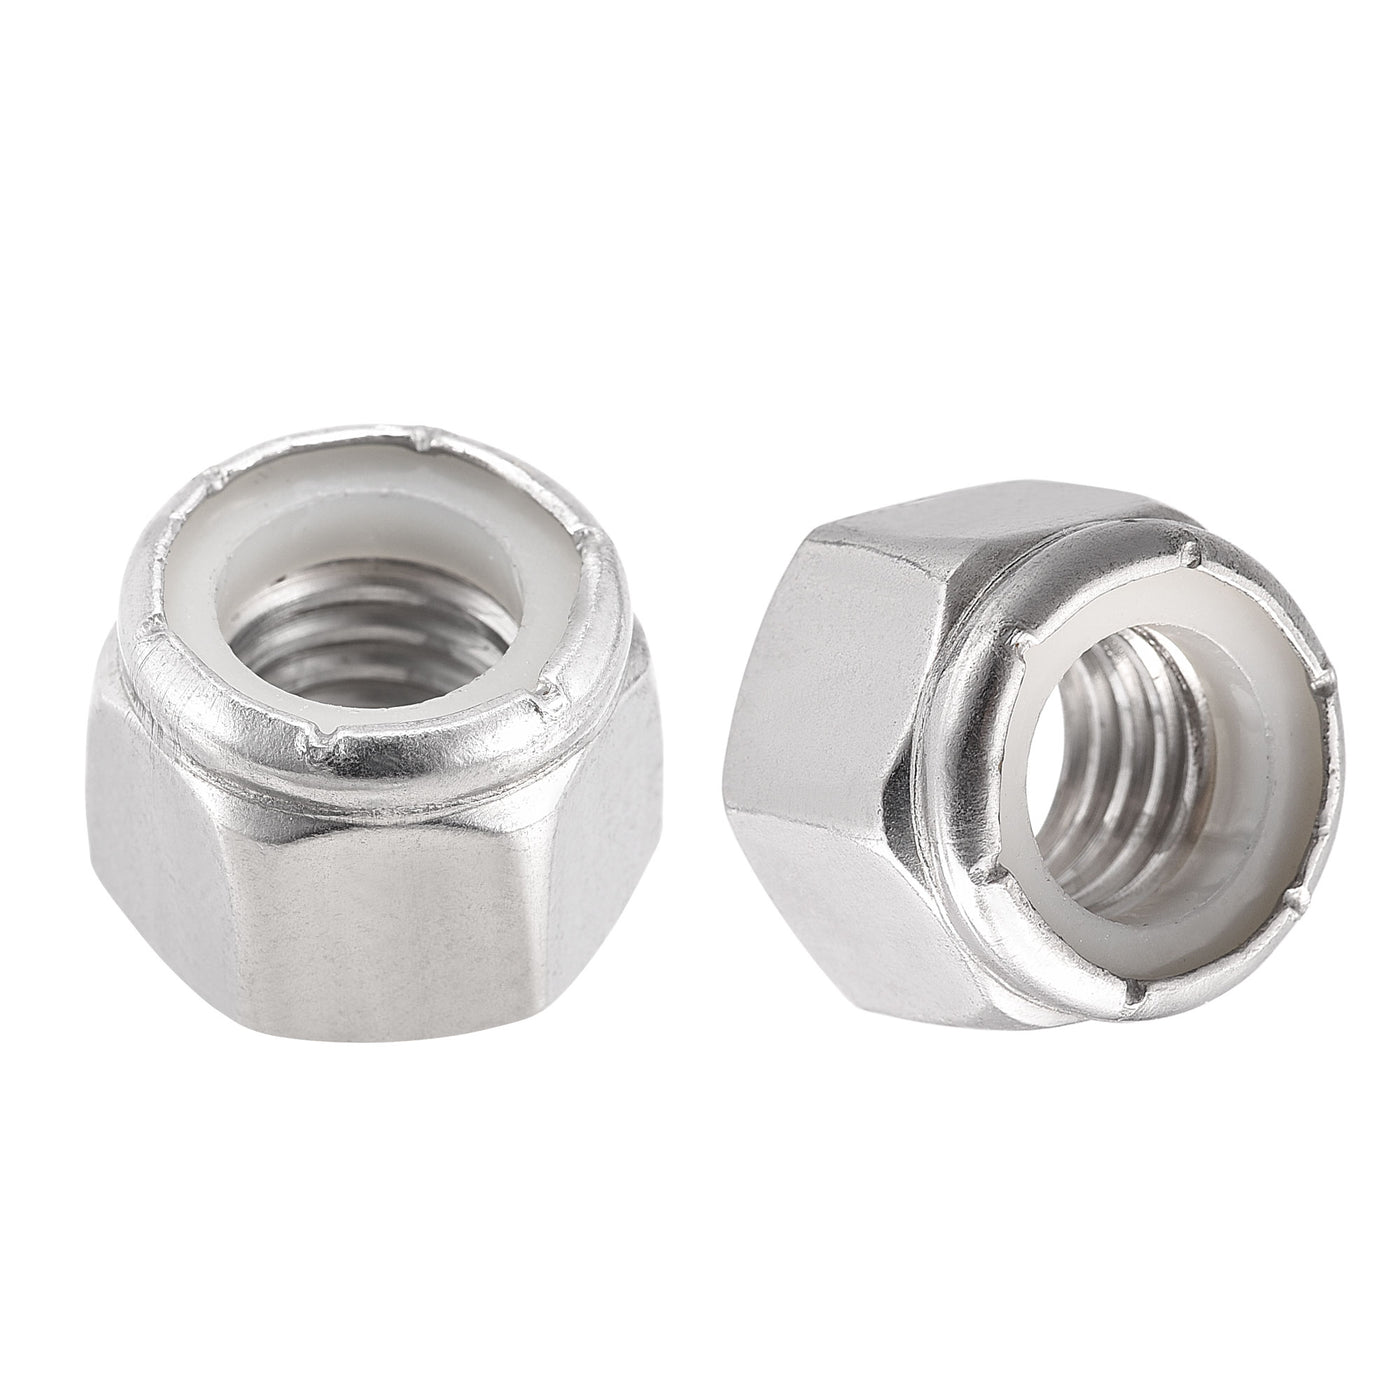 uxcell Uxcell 1/2-13 UNC Nylon Insert Hex Lock Nuts, 304 Stainless Steel, Plain Finish, 20pcs